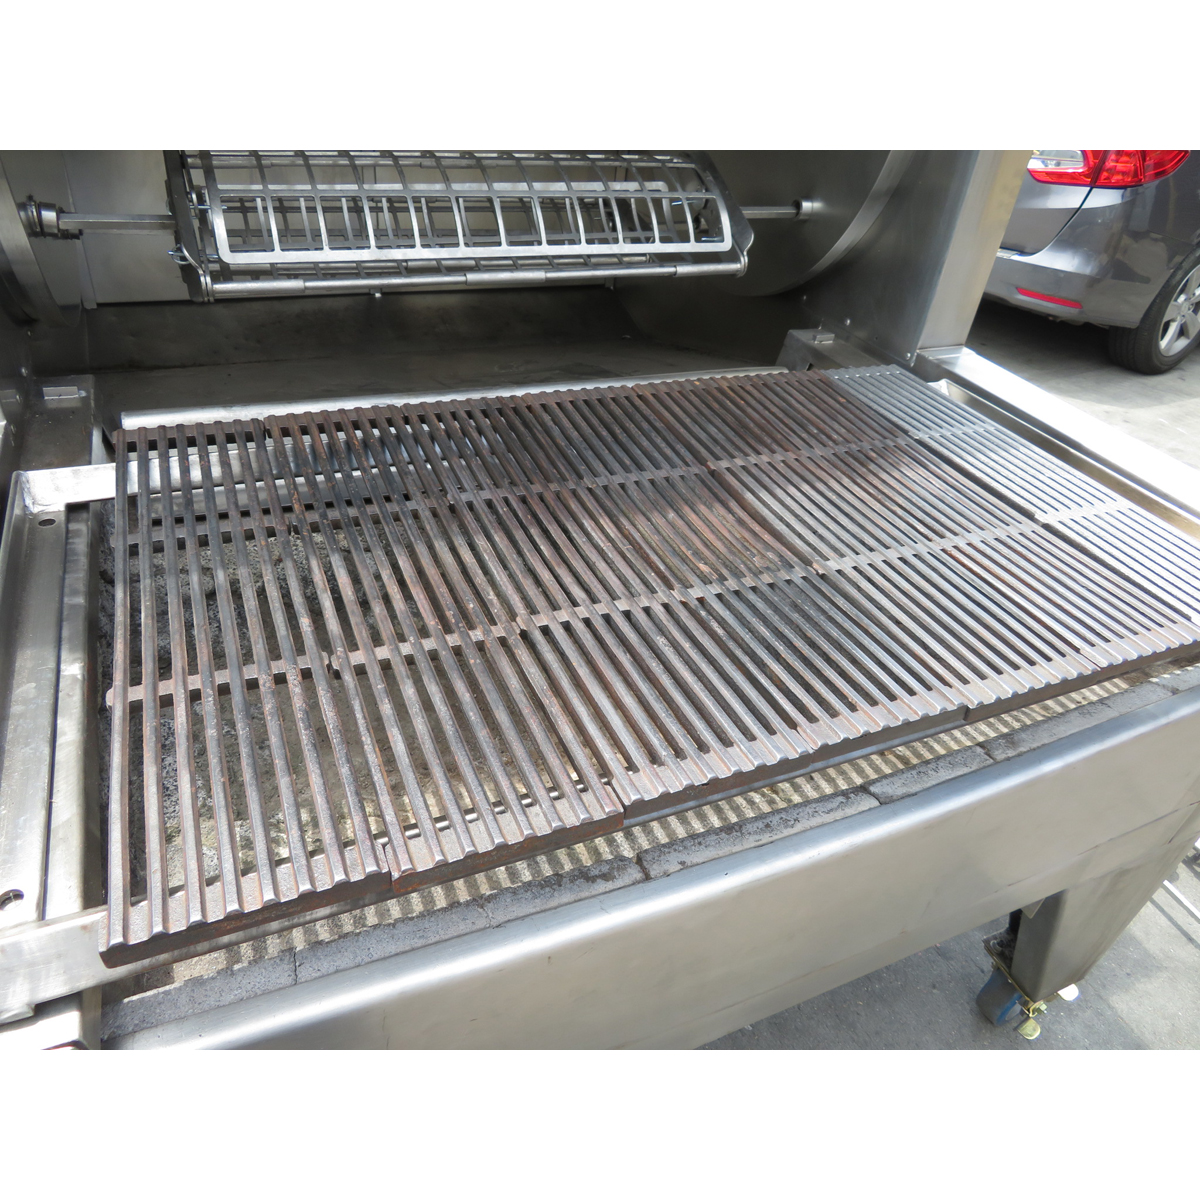 Woodstone MT. OLYMPUS WS-SFR-6-SB Stone Fired Rotisserie on Wheels with Cooking Grill, Used Excellent Condition image 3